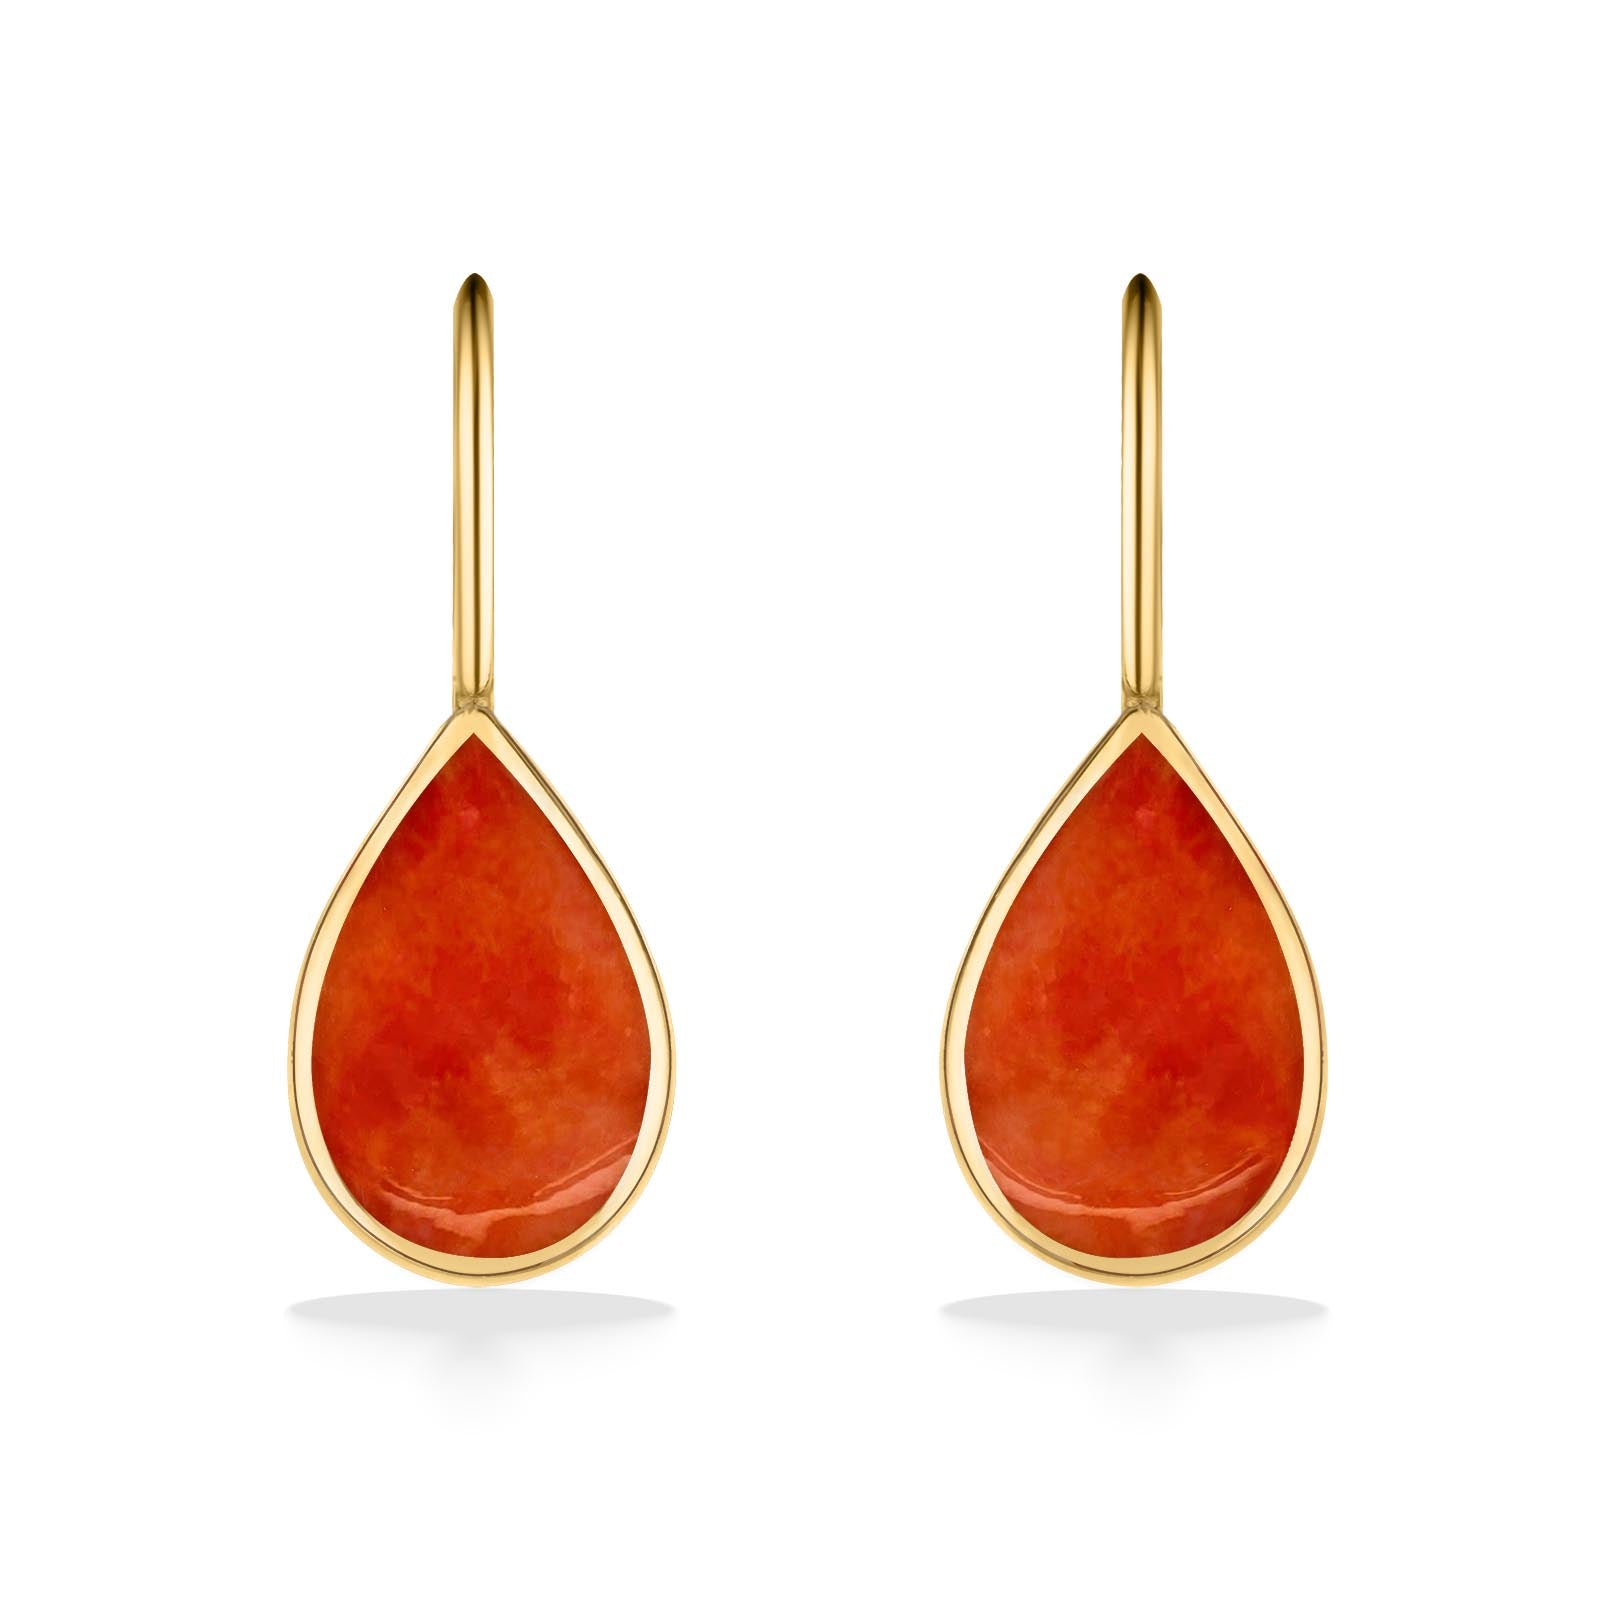 765434 - 14K Yellow Gold - Kabana Pear Shaped Inlay French Wire Earrings